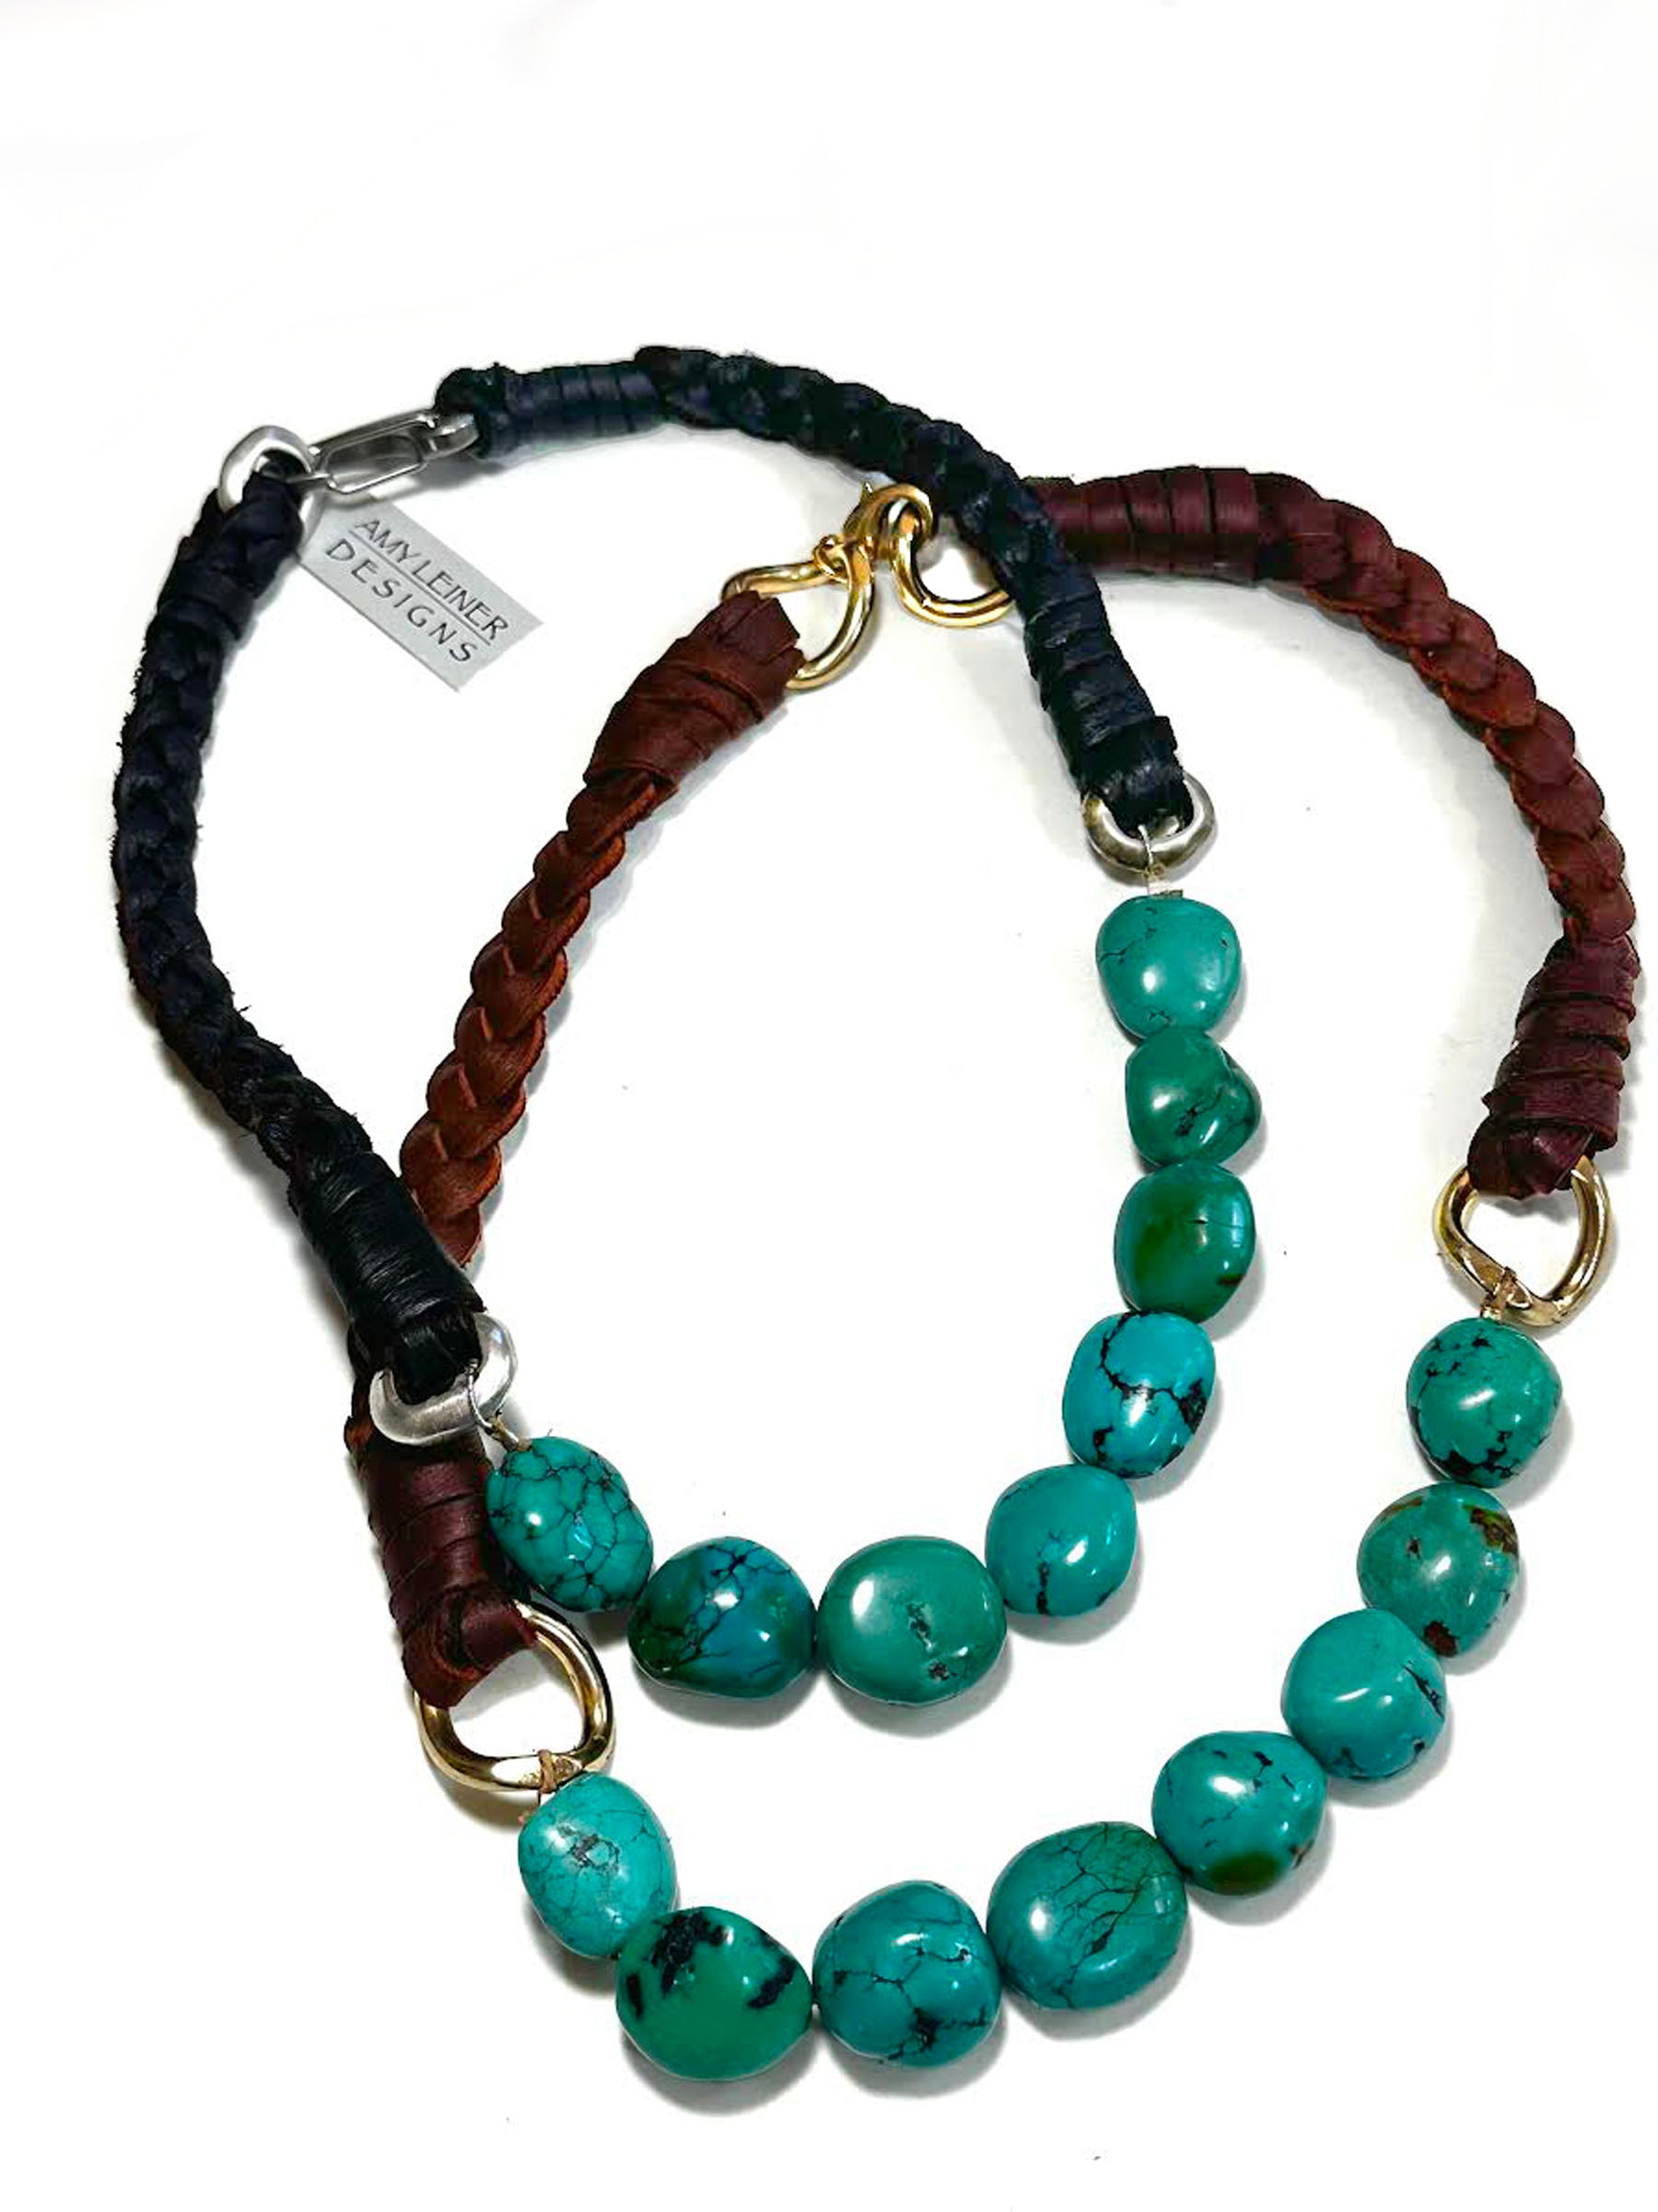 Leather Turquoise Choker